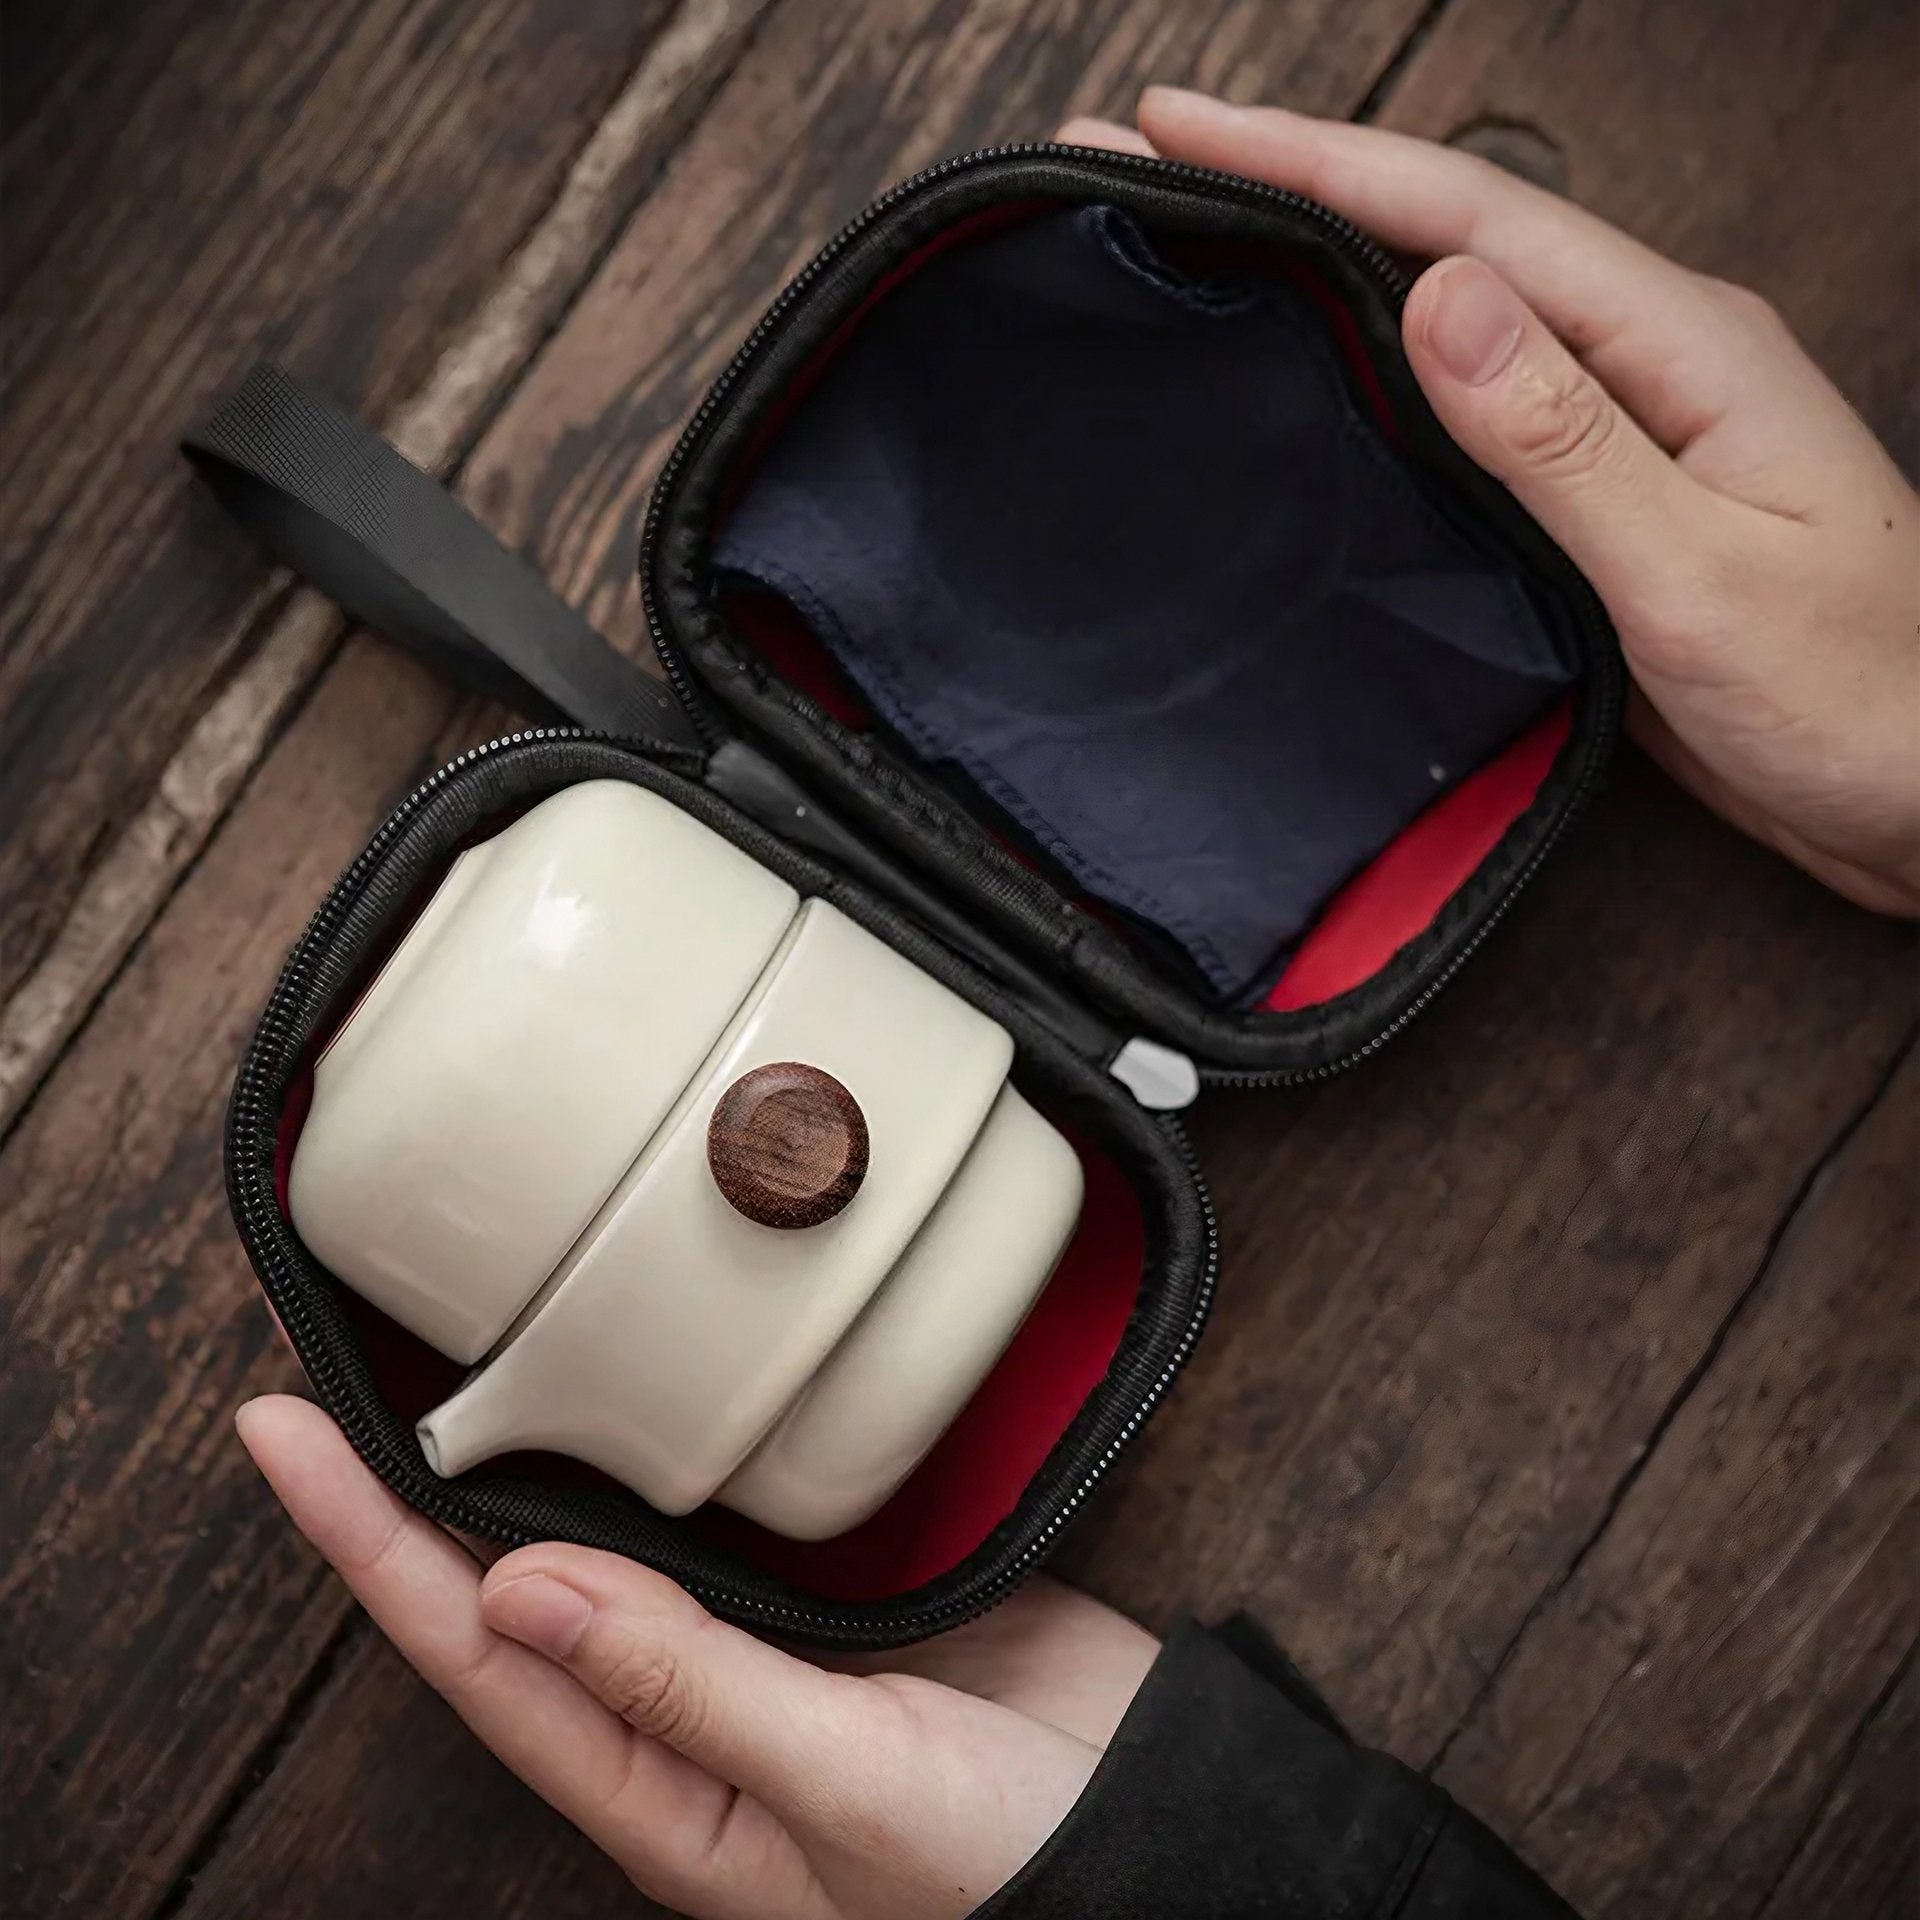 A hand holding a black zippered case open to reveal a minimalist white travel tea set, including a teapot with a circular dark wooden lid and two small cups, against a wooden surface.